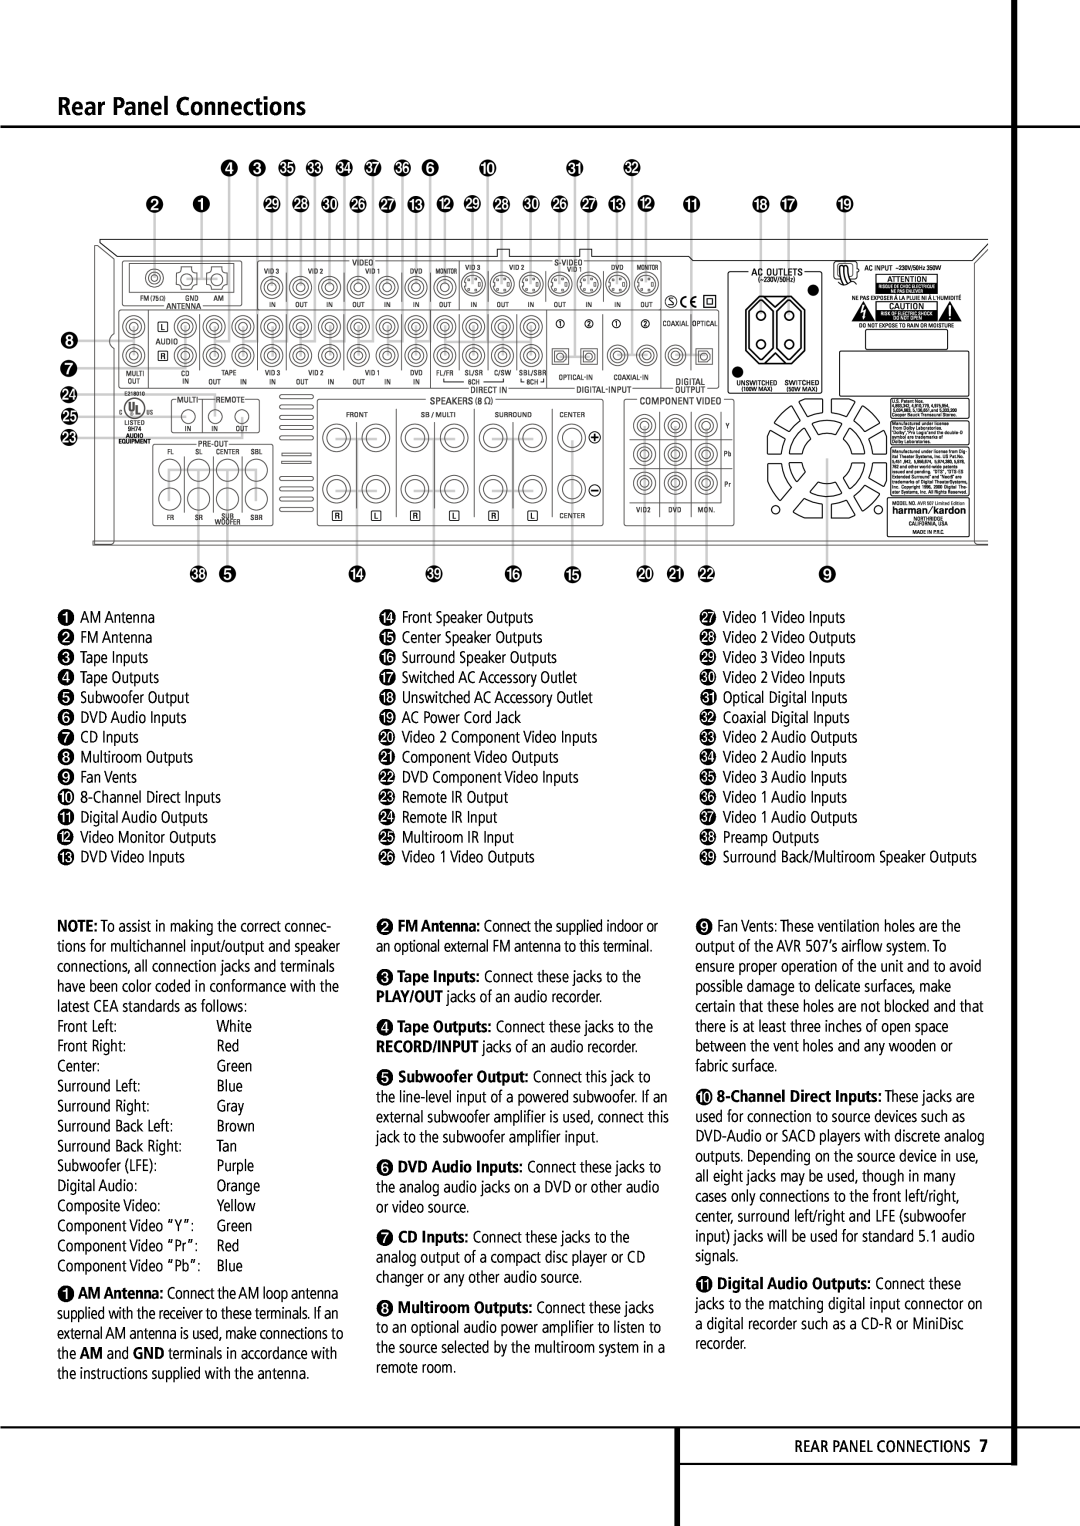 Harman-Kardon AVR507 owner manual Rear Panel Connections, Digital Audio Outputs Connect these 